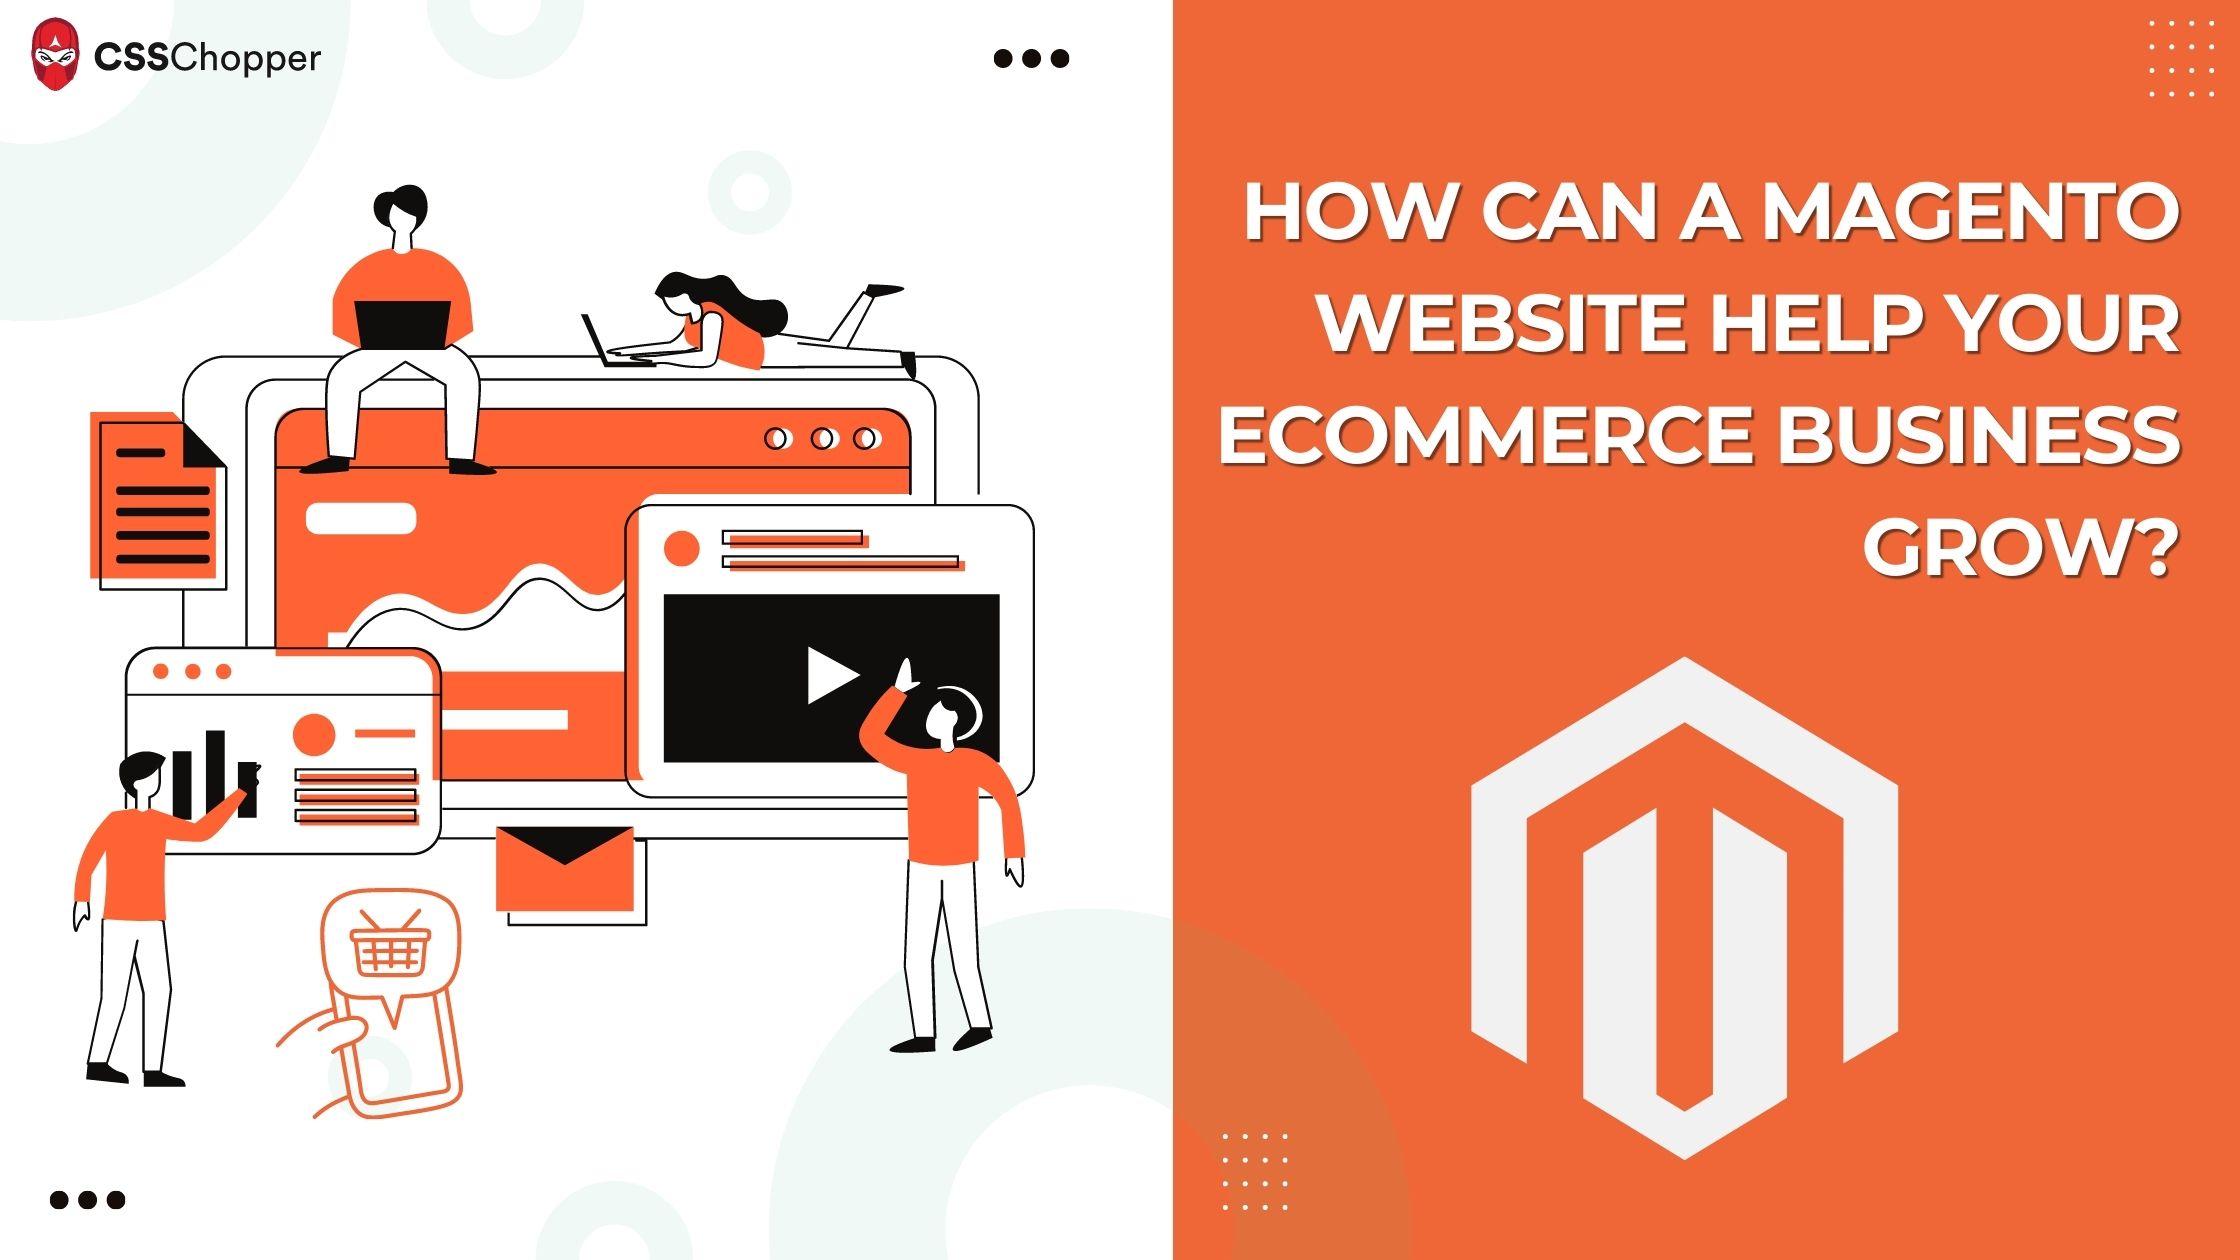 How Can A Magento Website Help Your eCommerce Business Grow